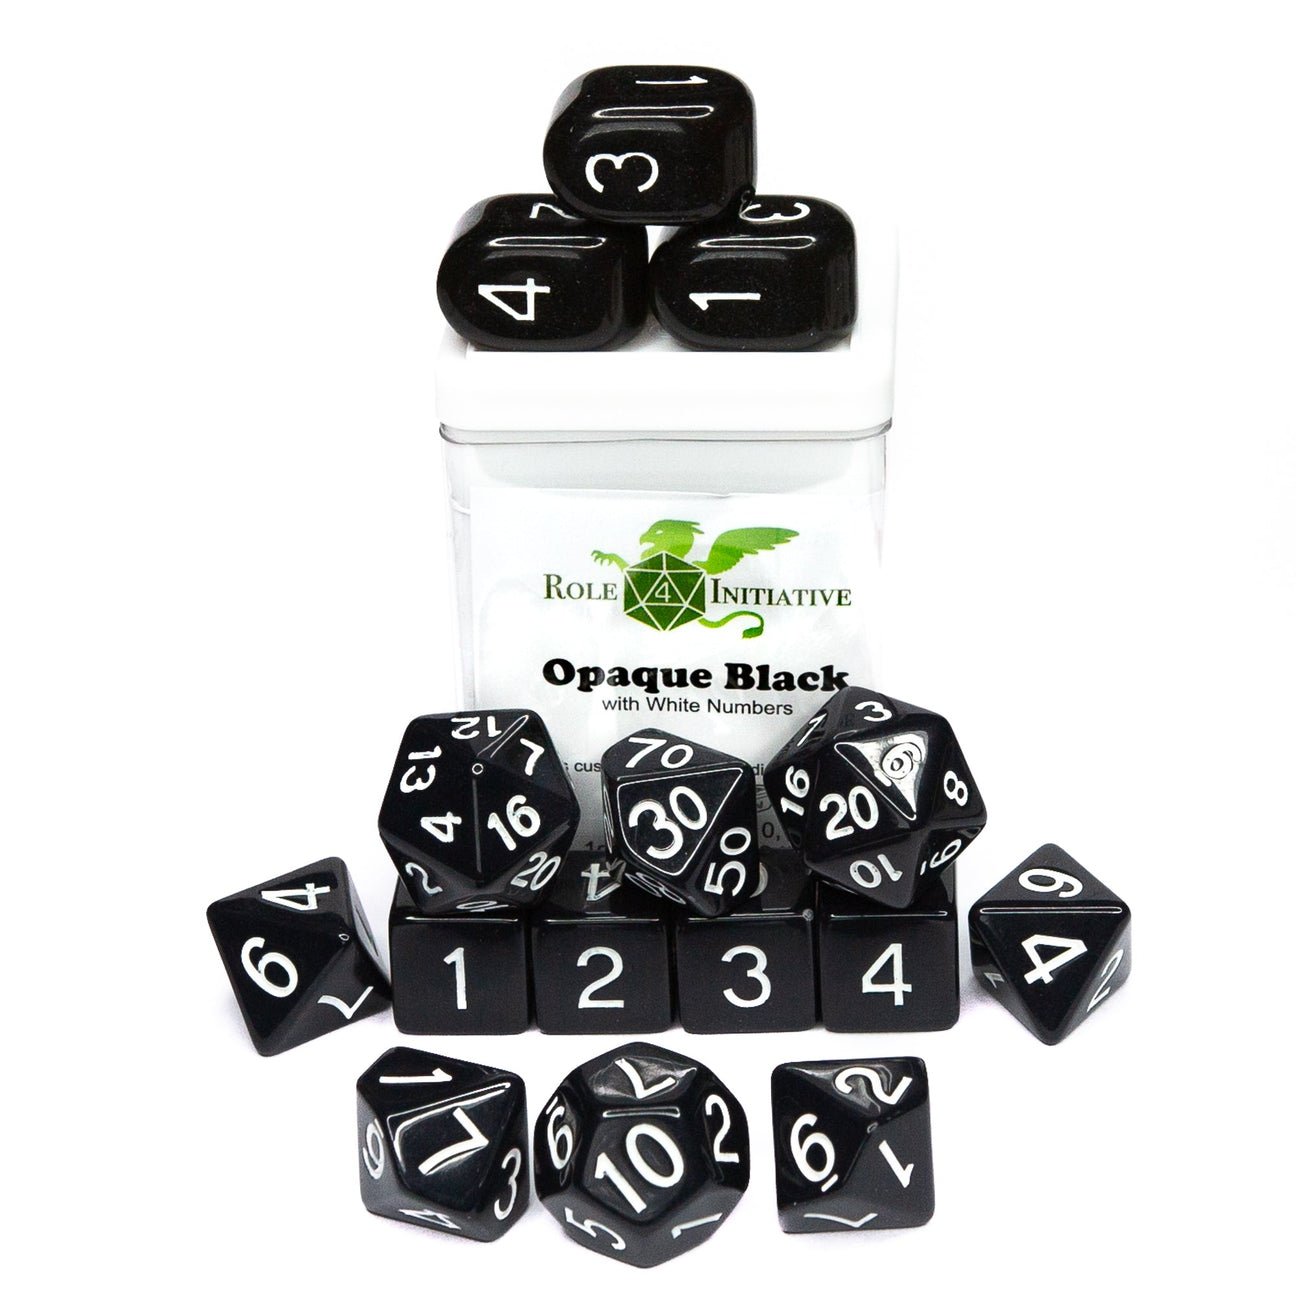 Opaque Black - 15 dice set (with Arch’d4™) - The Fourth Place